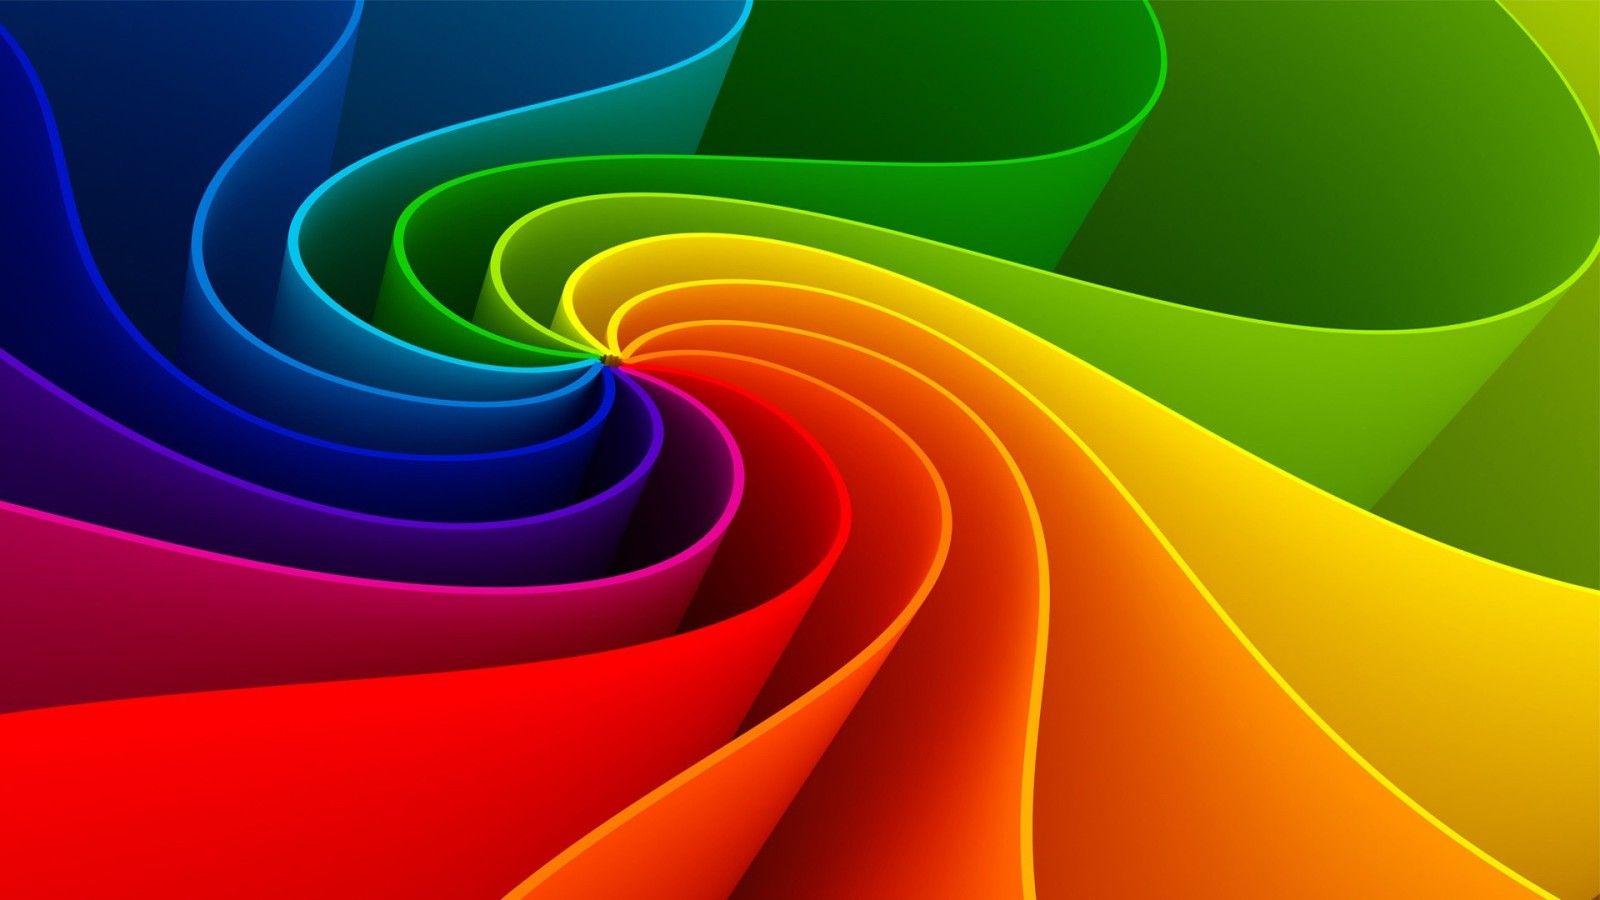 Abstract Wallpaper Full Color. Image Wallpaper Collections